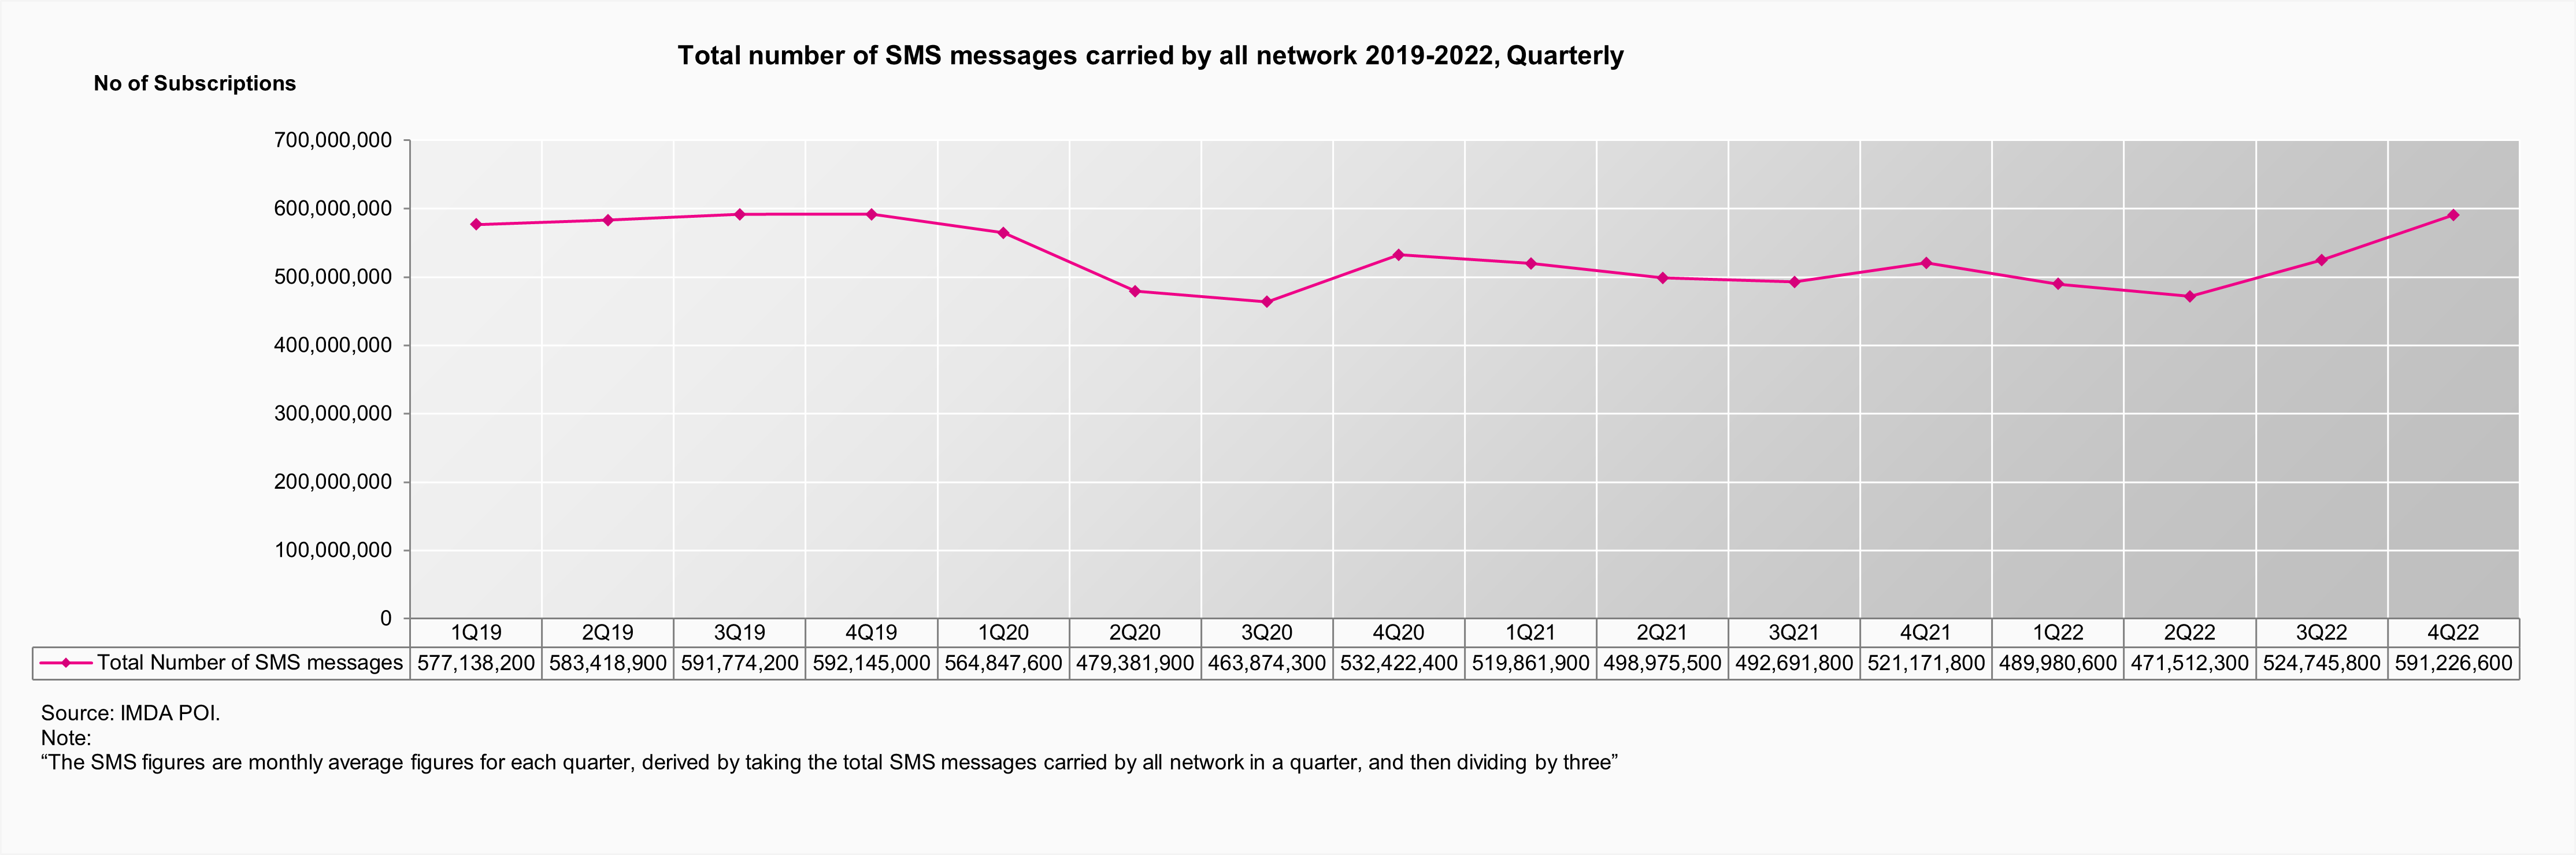 A Statistical Chart on the Total number of SMS messages carried by all networks 2019-2022, Monthly Average by IMDA POI